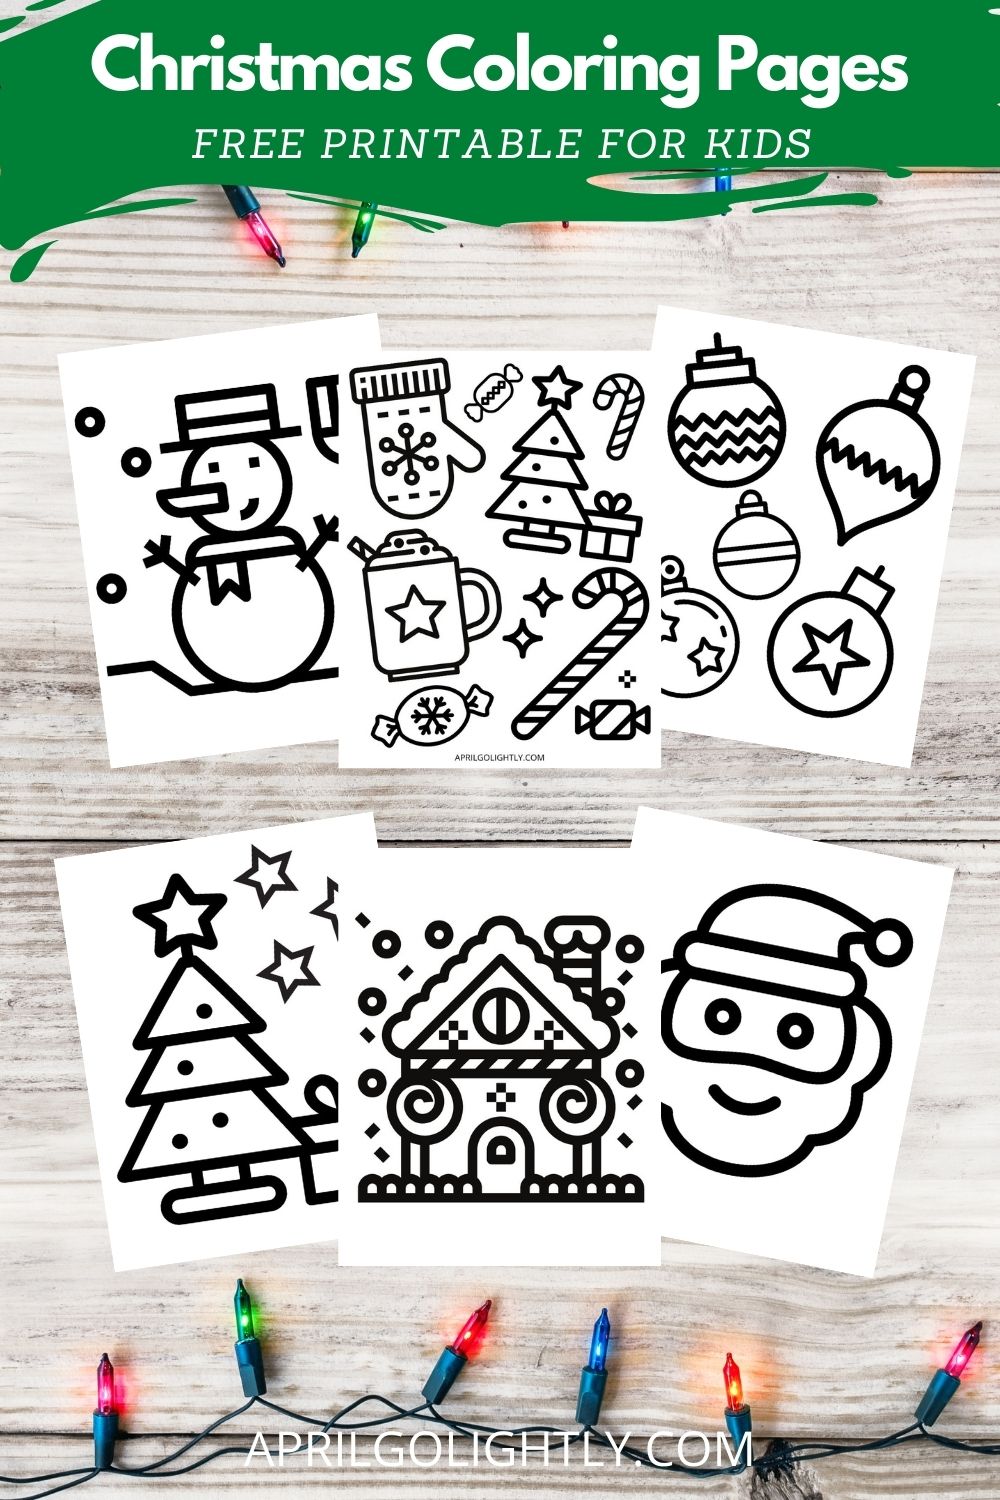 We absolutely love coloring here and have been working on getting used to writing and coloring in the lines with these Christmas Coloring Pages Free Printable.